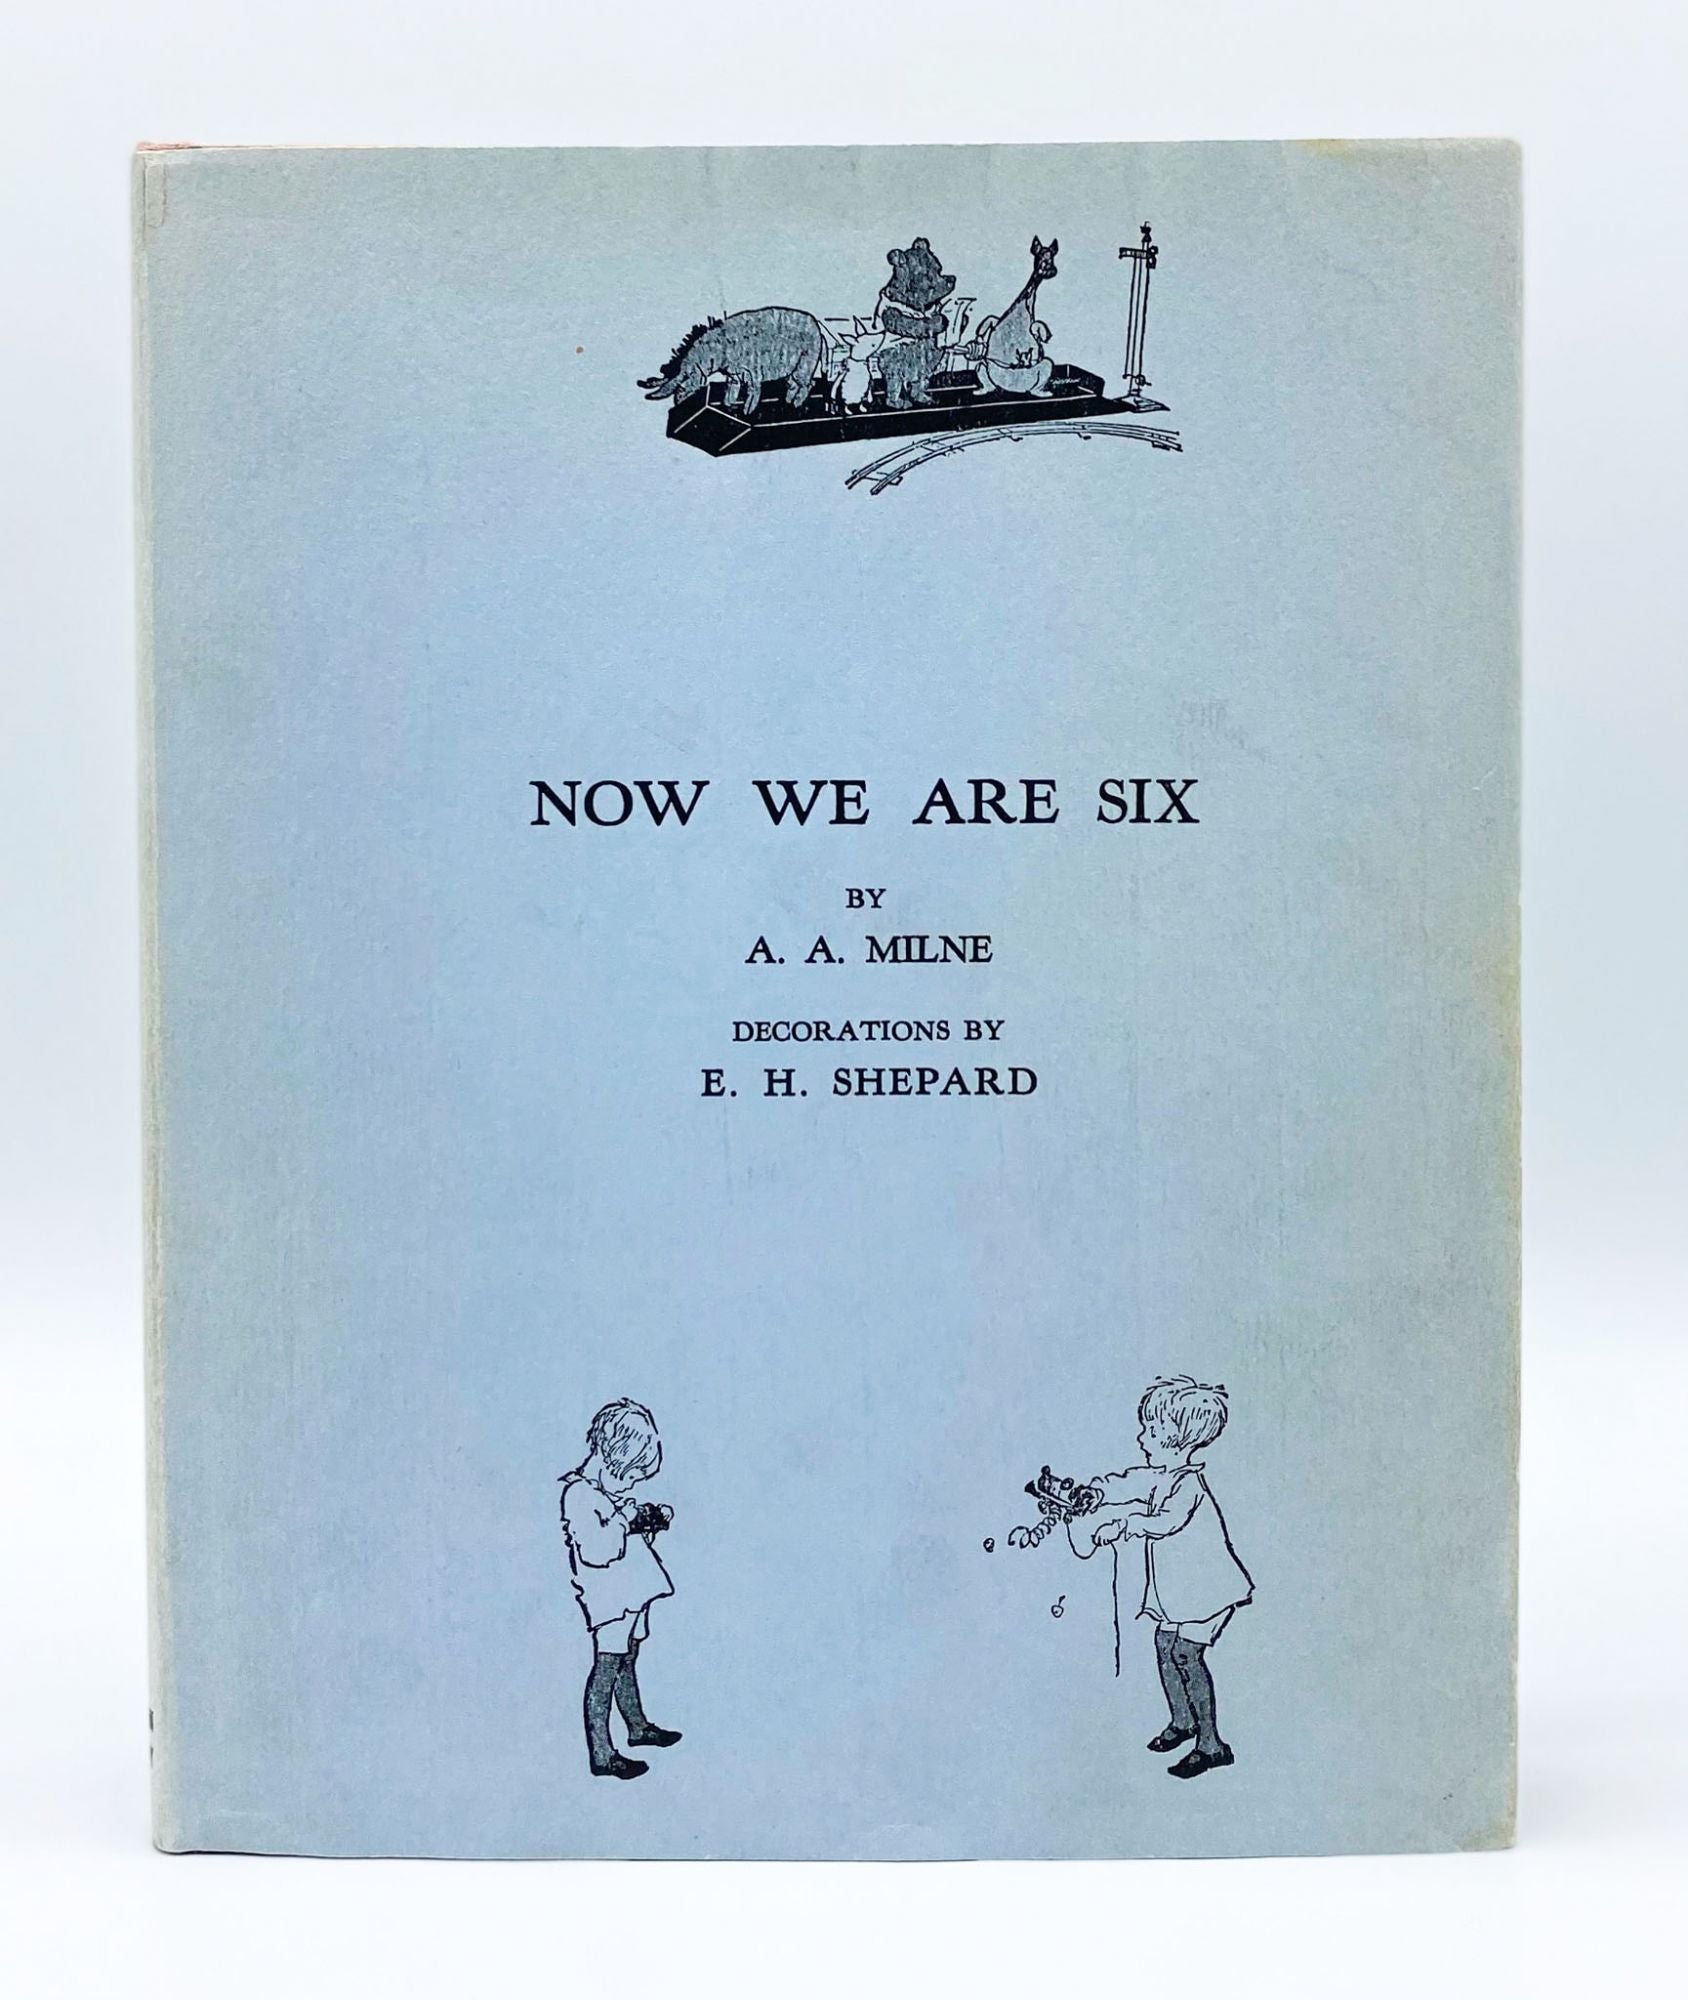 NOW WE ARE SIX by A. A. Milne, Ernest H. Shepard on Type Punch Matrix